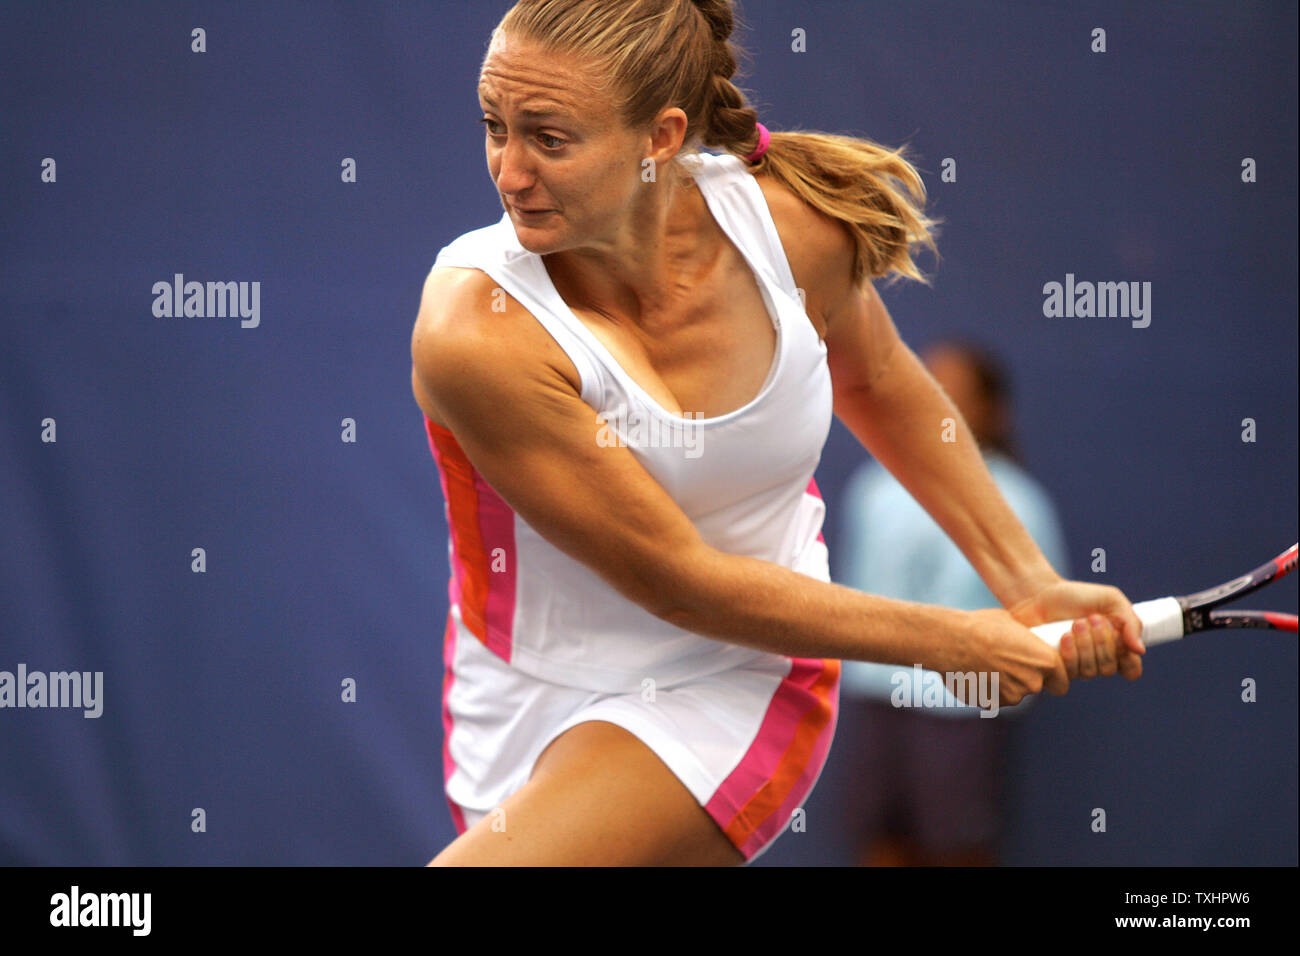 Mary Pierce of France, finalist at 2005 French Open, wins double match with partner Marion Bartoli of France over Salerni/Vento-Kabchi (6-0, 6-7, 6-2) at Acura Classic women's tennis tournament, Carlsbad, California, USA on August 02, 2005.   Finals are on August 7, 2005. (UPI Photo/Tom Theobald) Stock Photo